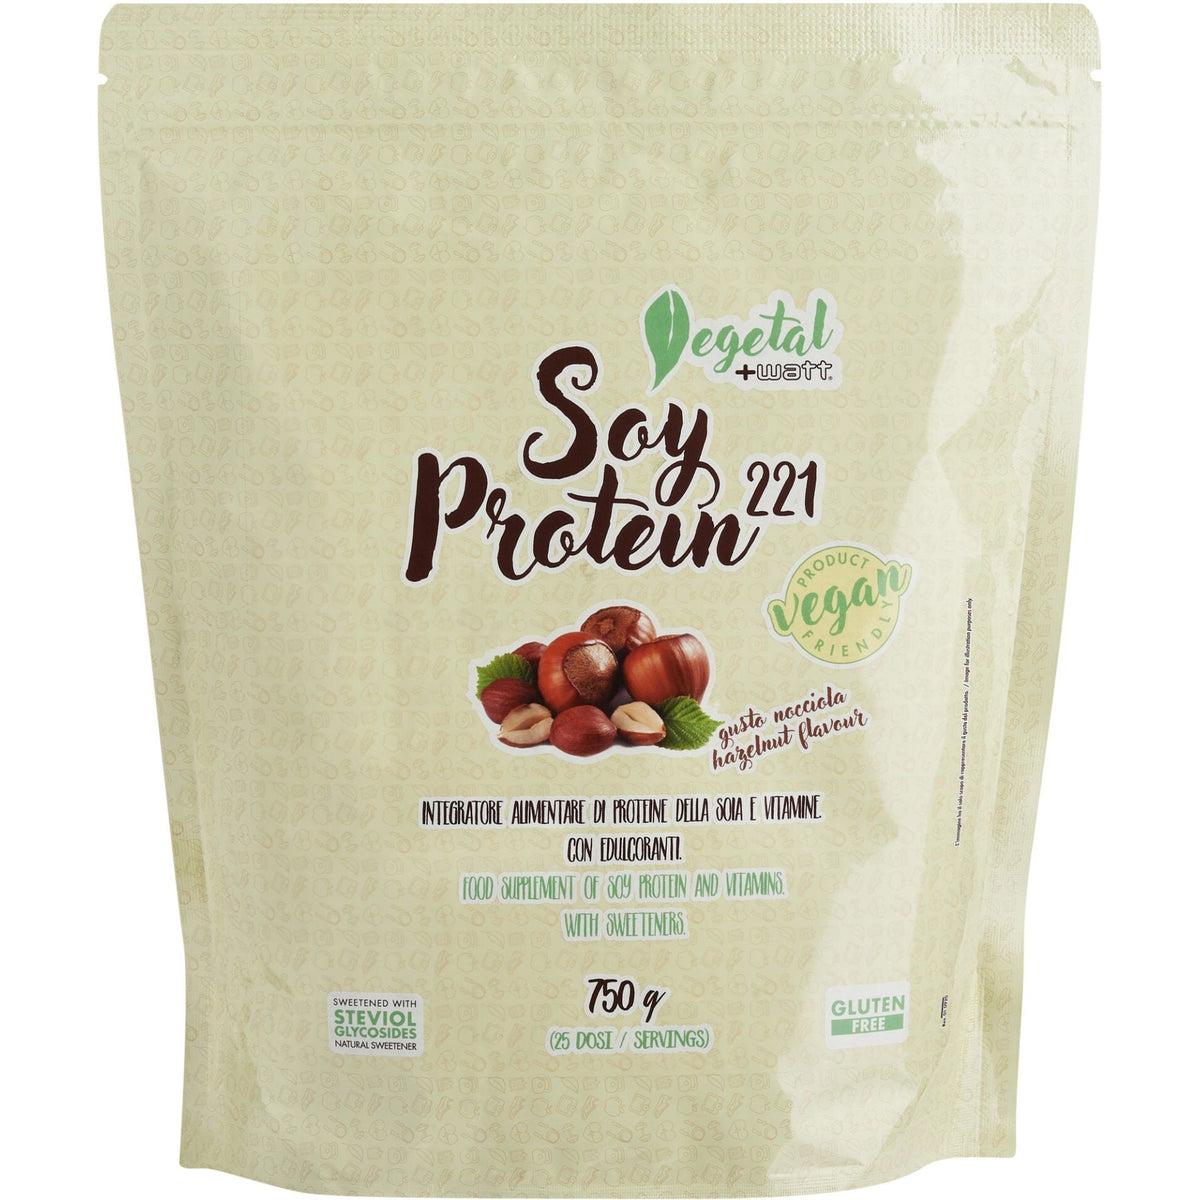 SOY PROTEIN 221 - 750g